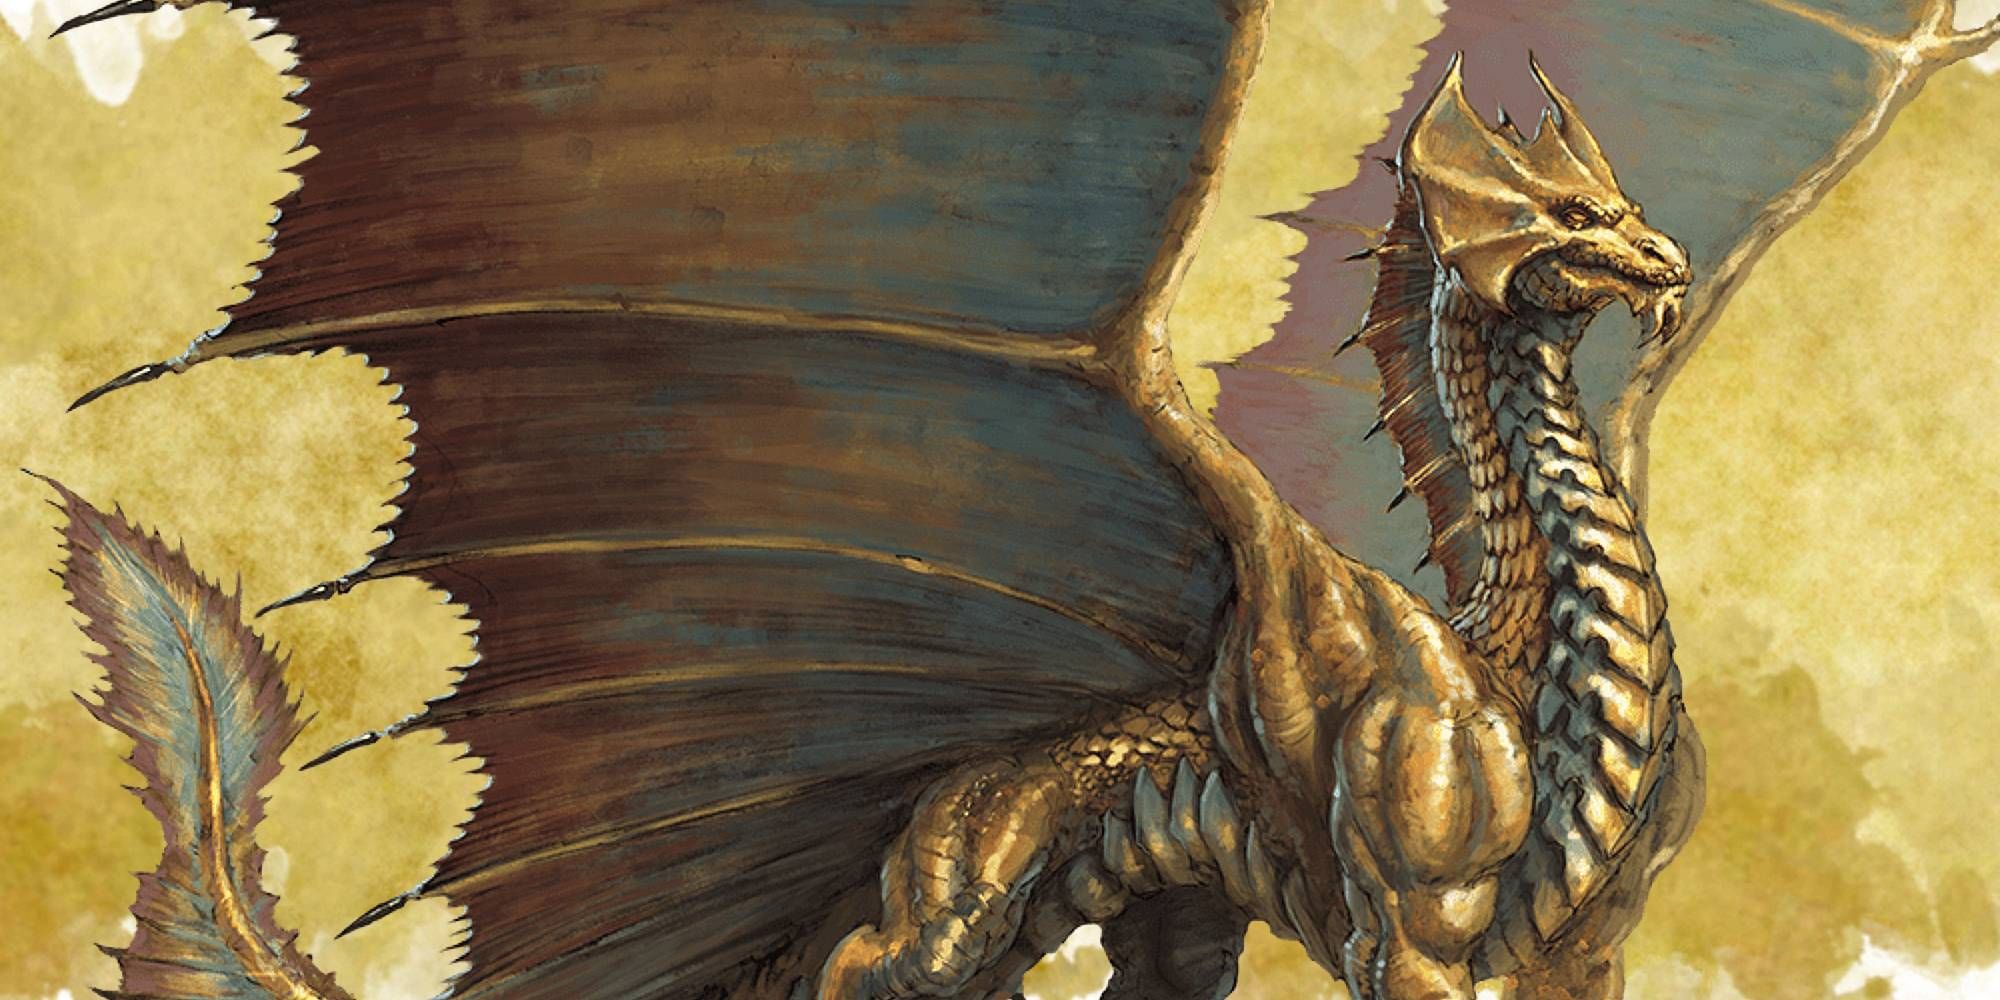 Tips For Running Metallic Dragons In A DnD Campaign